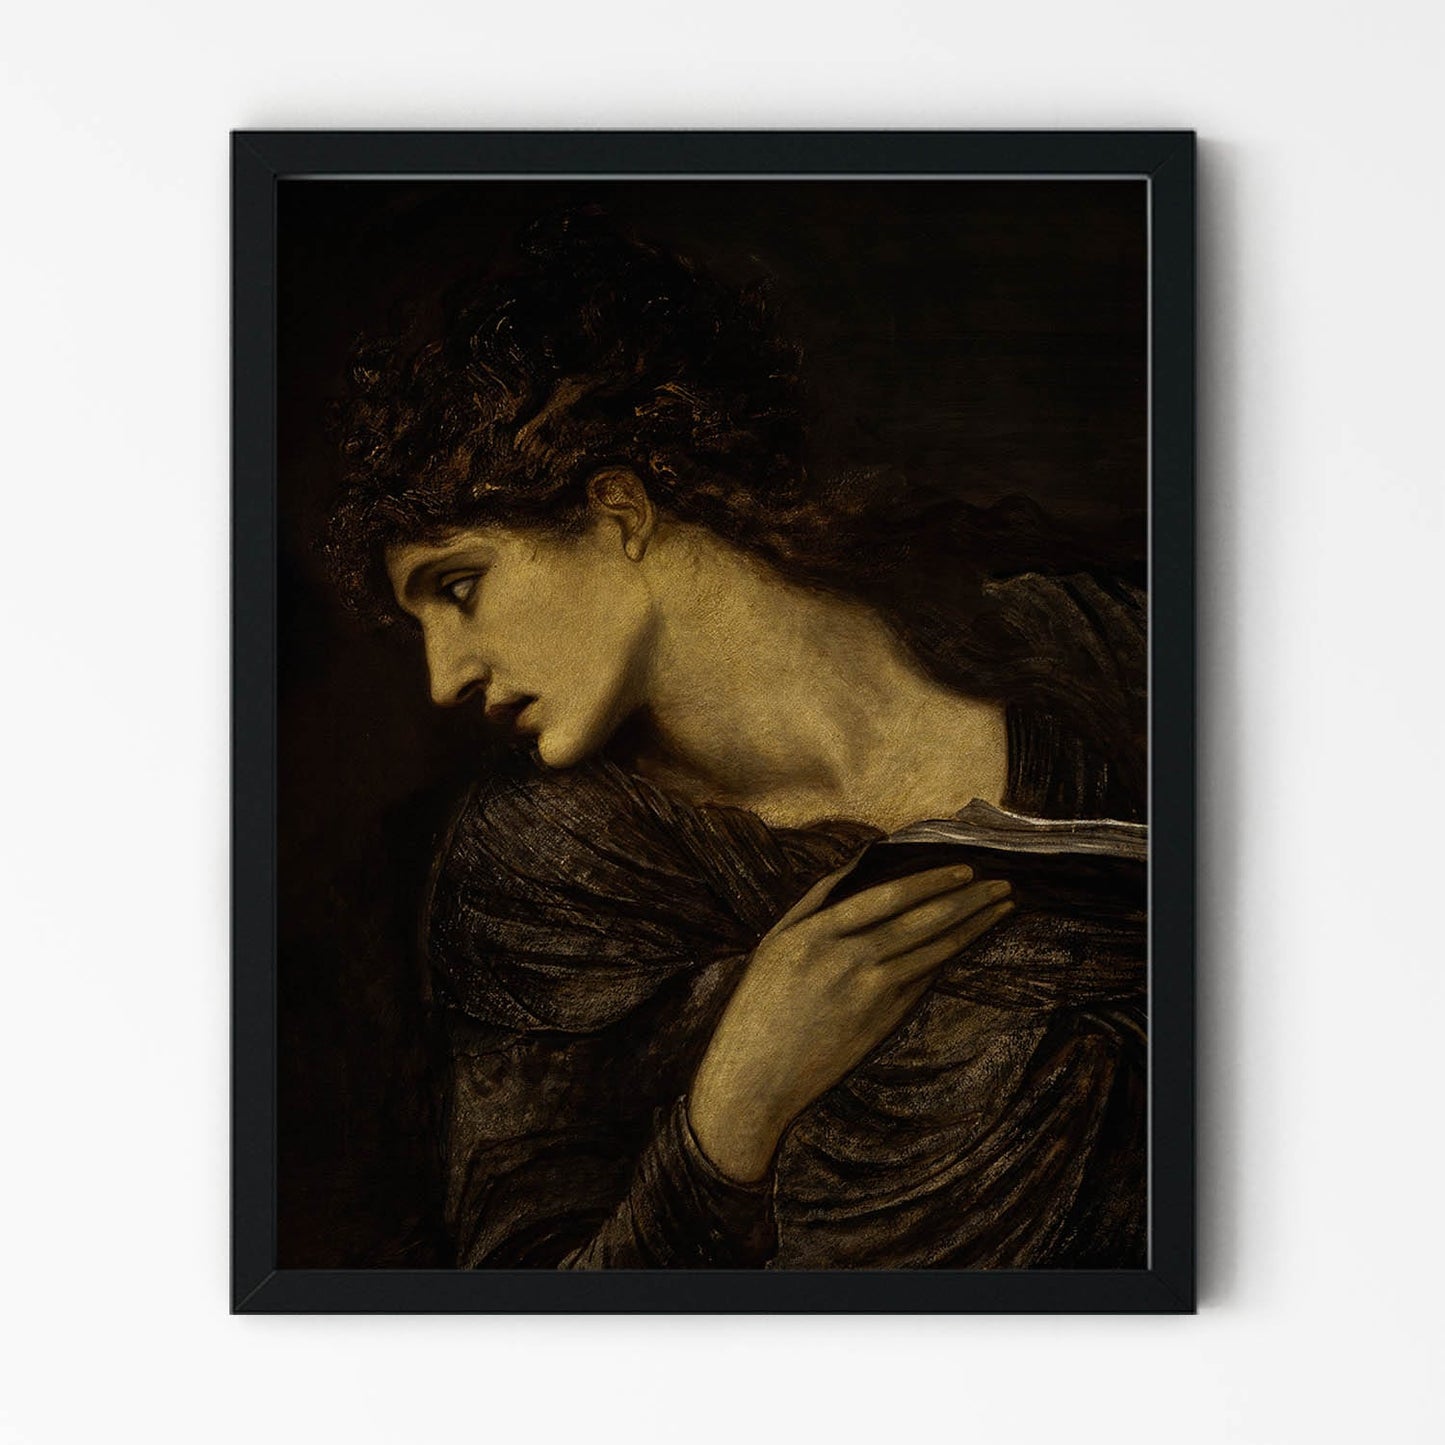 Black and White Moody Art Print in Black Picture Frame